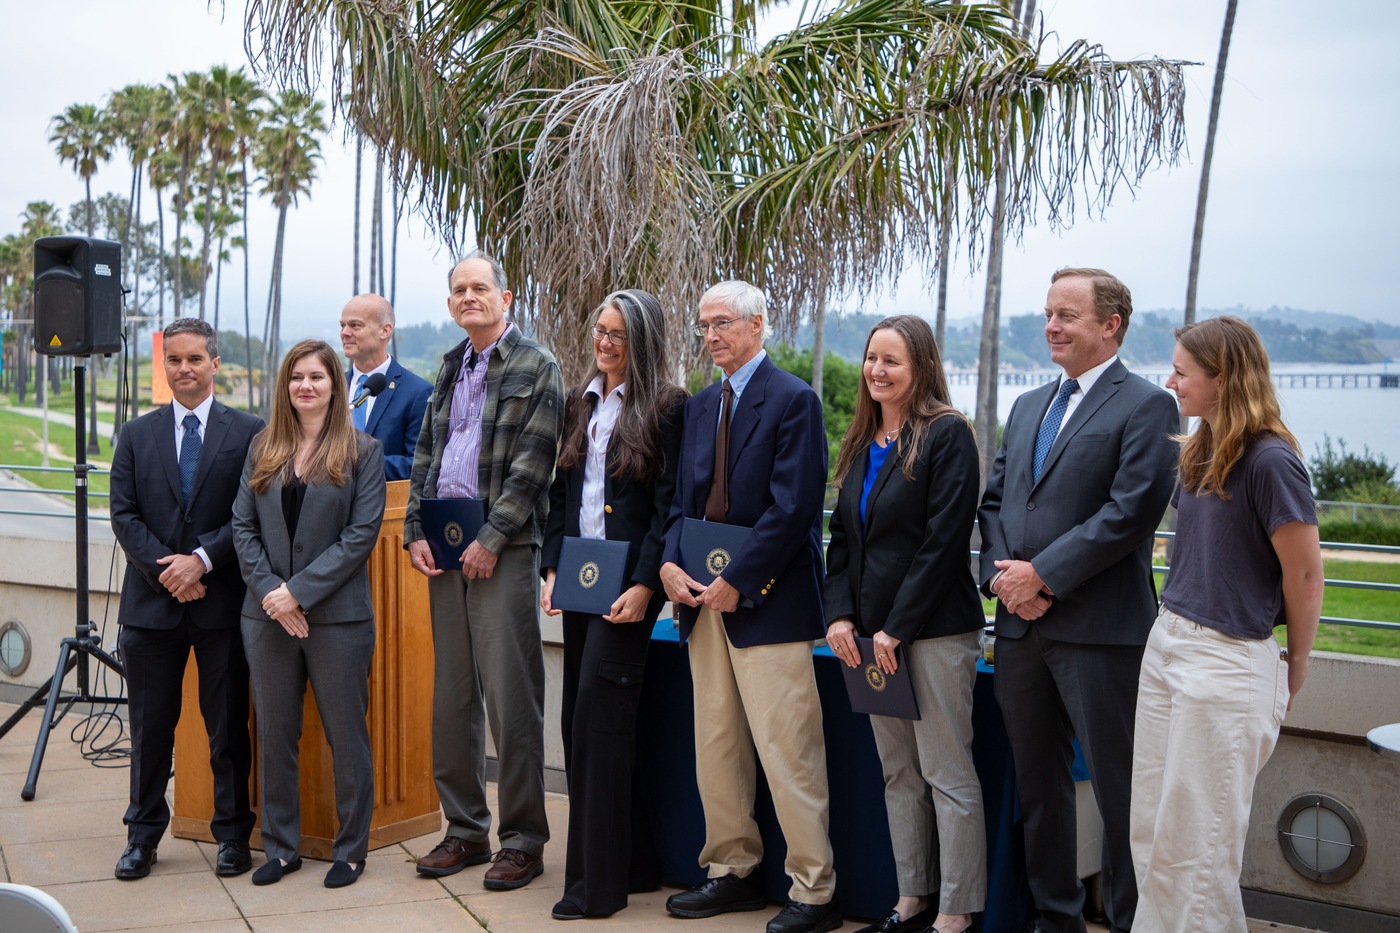 Members of the investigative team pose for photos at the Director's Awards ceremony, hosted at UC Santa Barbara. From left to right, USERT lead Ty Summers, SA Ketrin Adam, ASAC Sean Hoard, Dr. Guy Cochrane, Donna Schroeder, Dr. Mark Page, Susan Zaleski, AUSA Matt O'Brien, and lab technician Makenna Colucci.